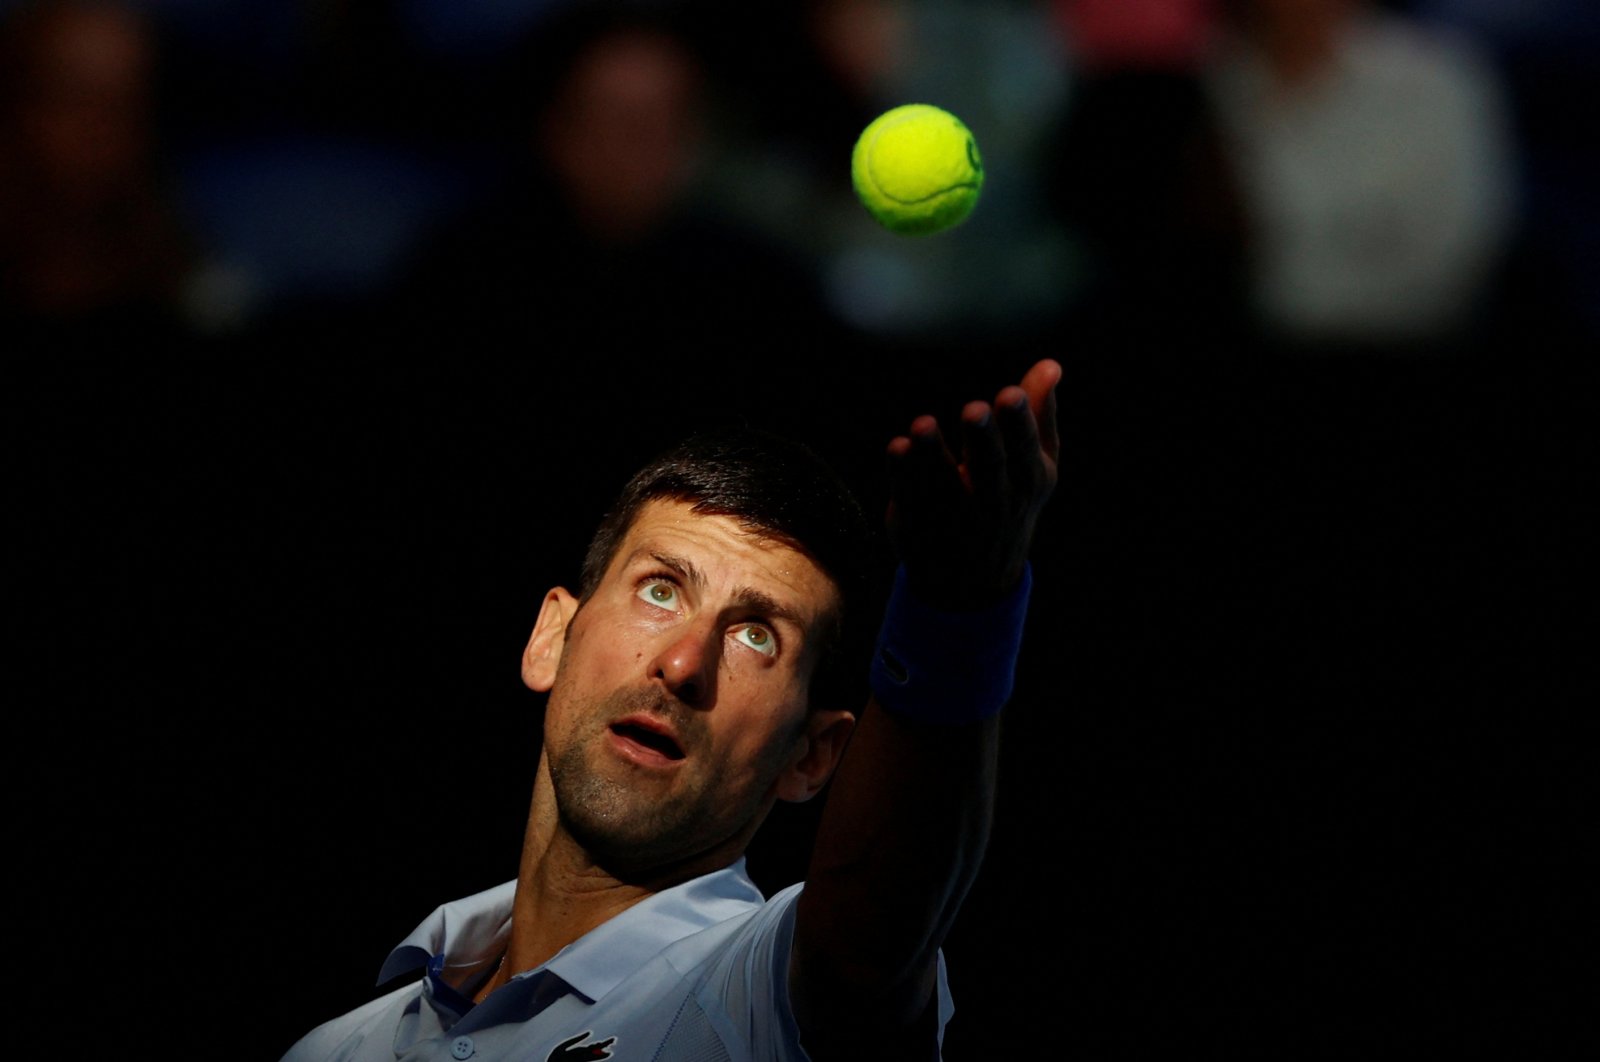 Djokovic remains force to be reckoned with despite youngsters wave